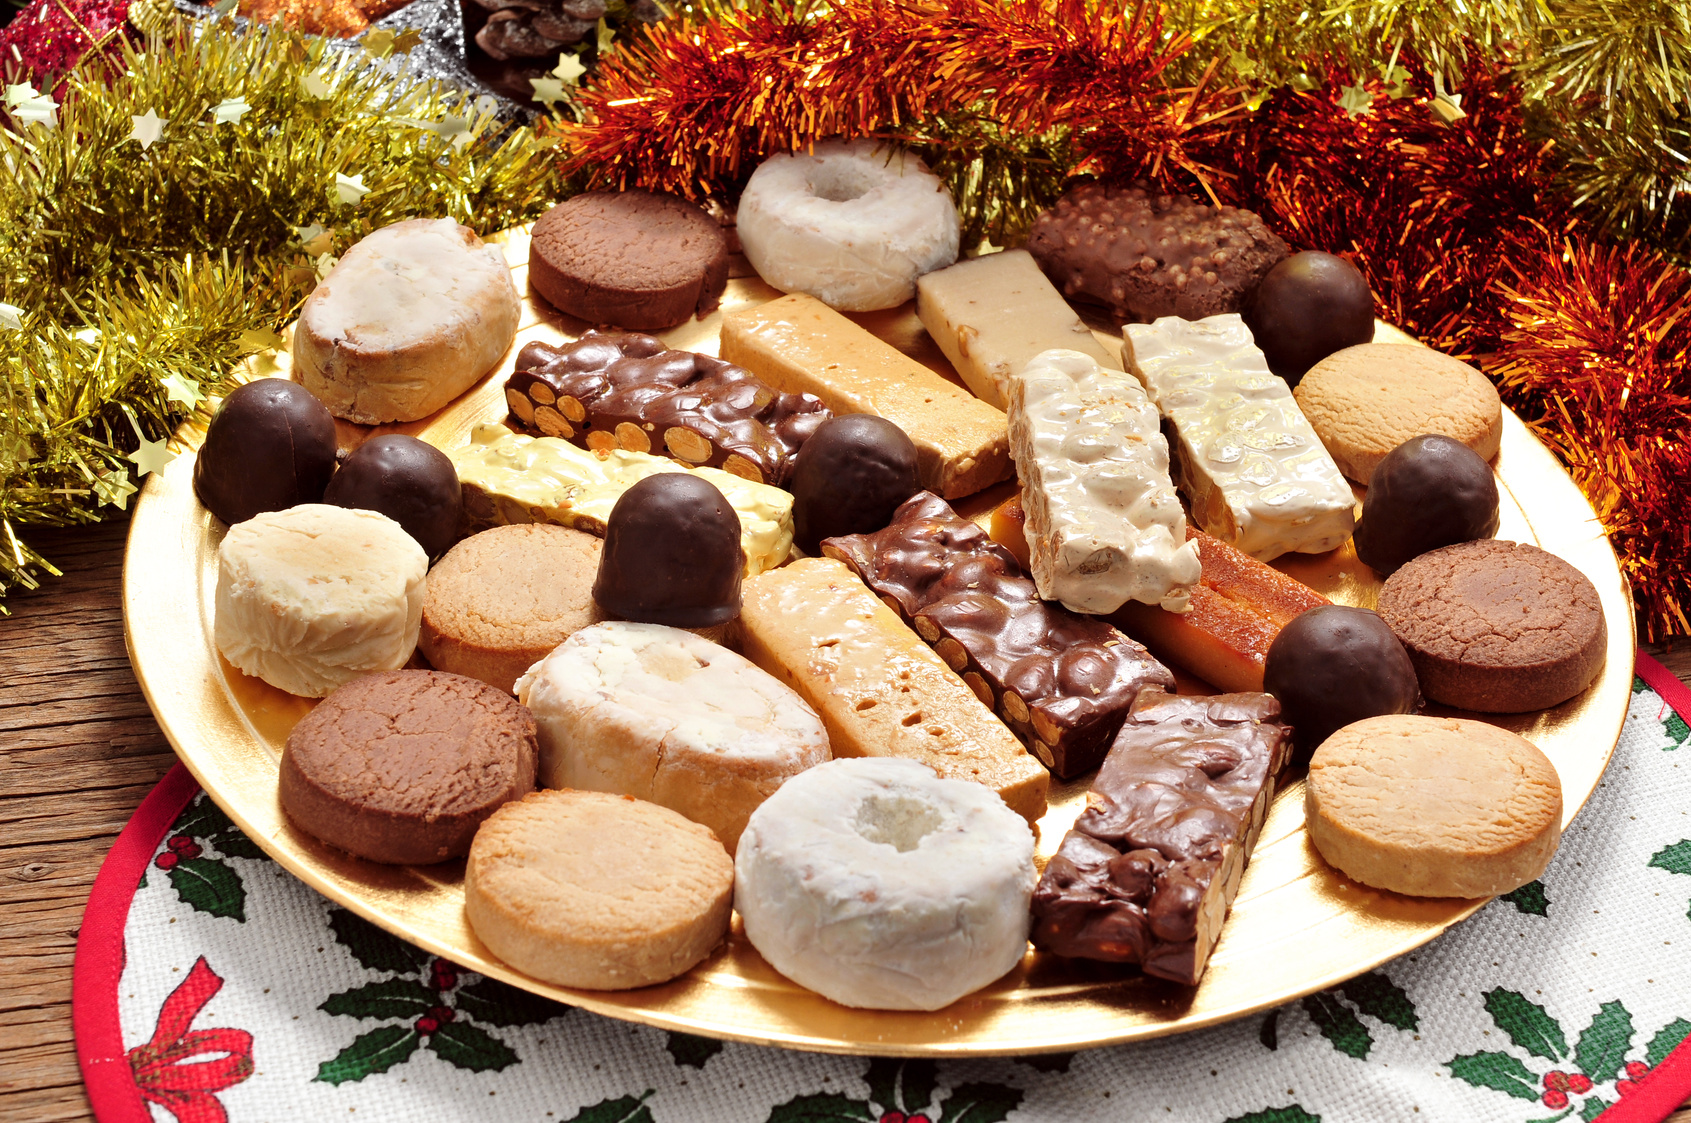 turron, polvorones and mantecados, typical christmas confections in Spain